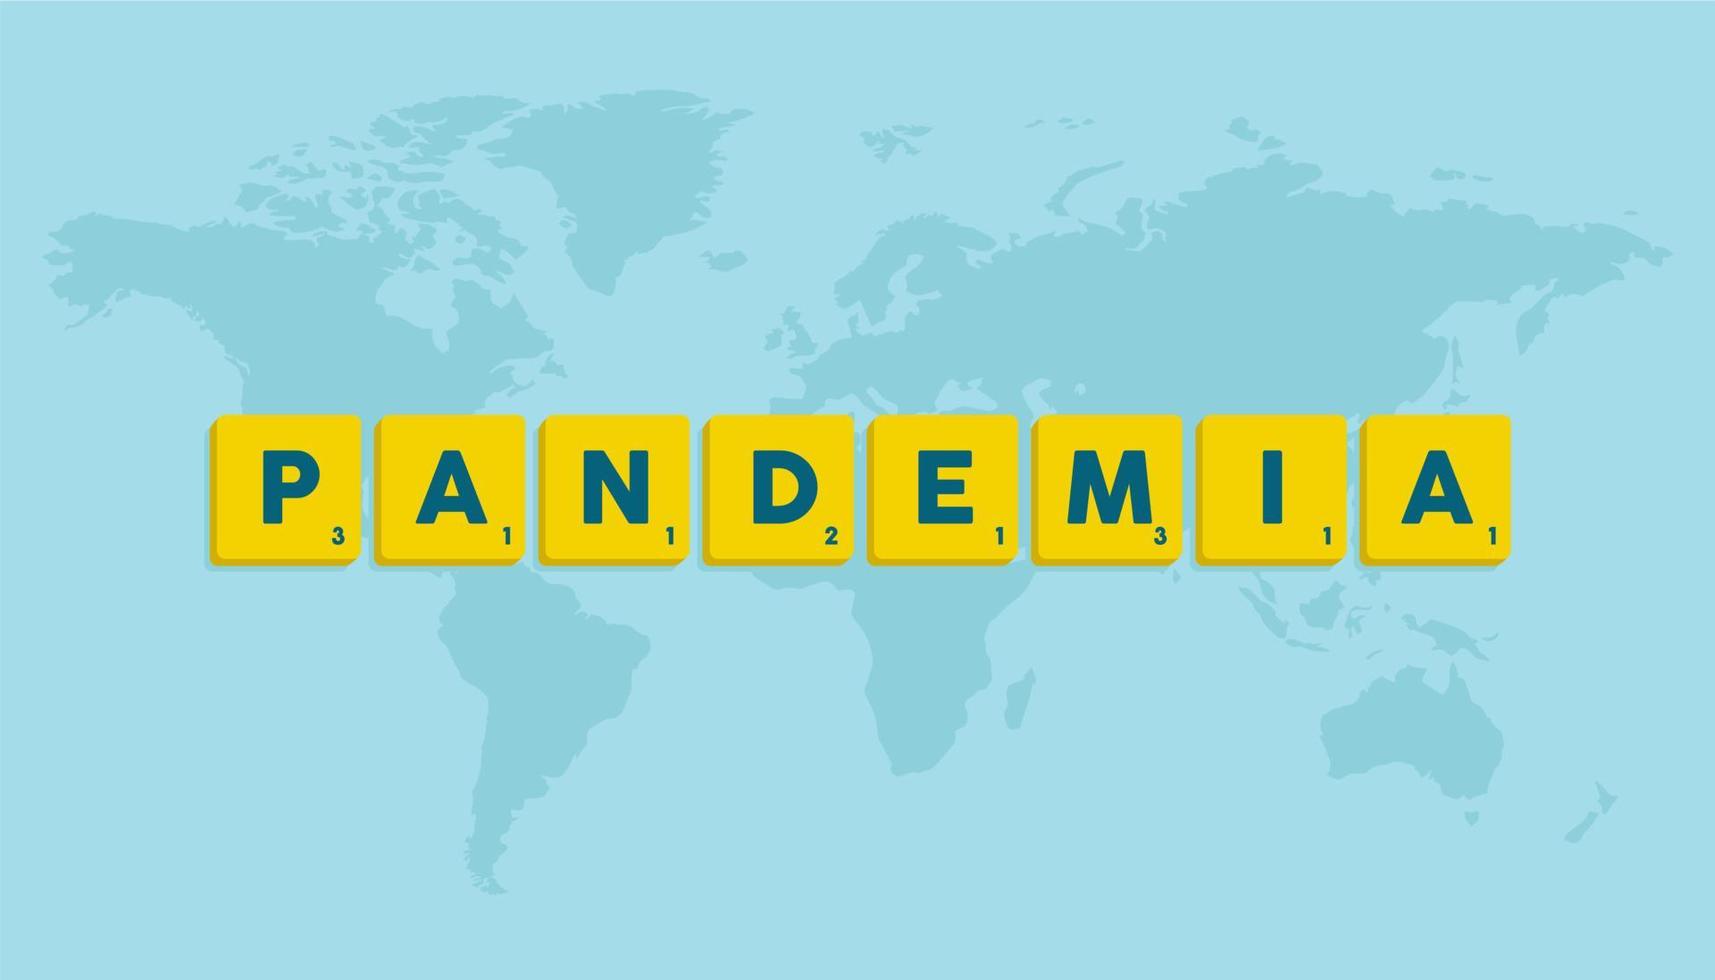 Pandemic written in spanish in letters with world map in grey background vector